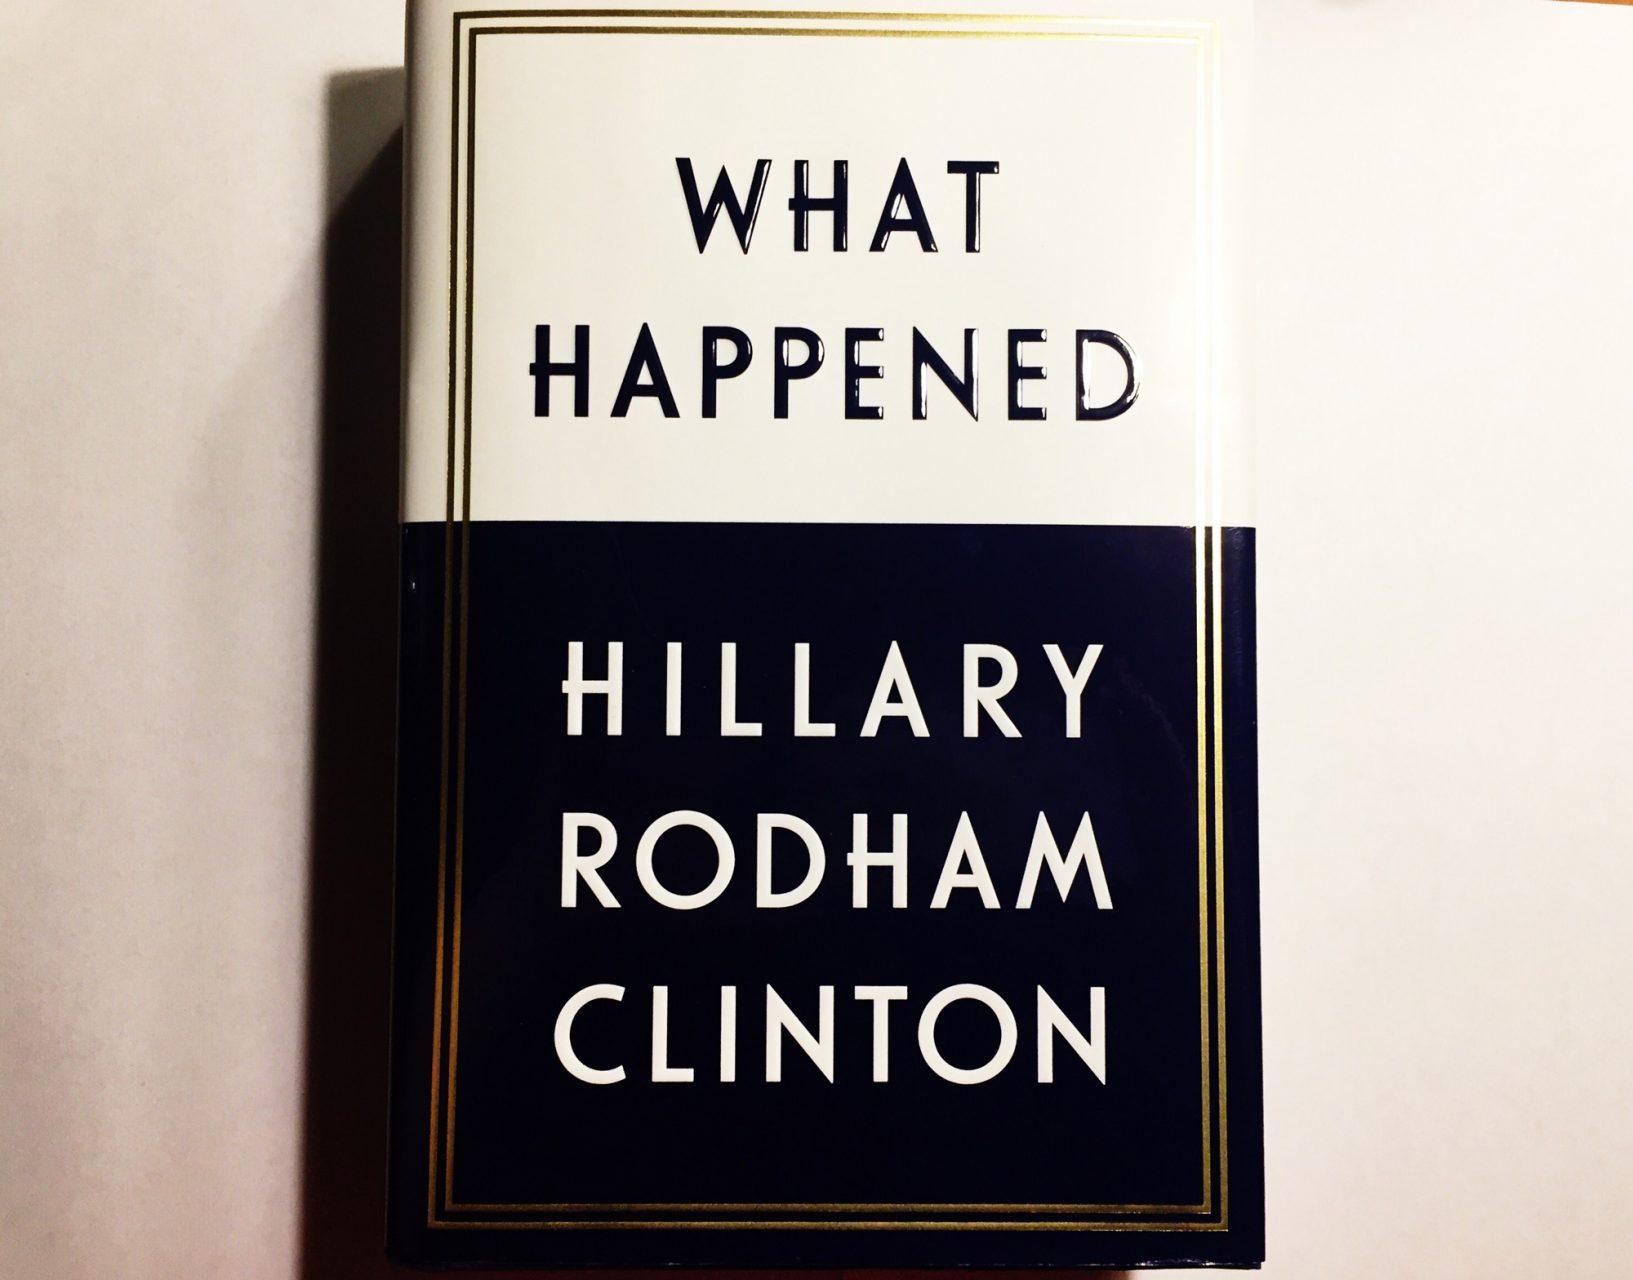 Hillary+Rodham+Clinton%E2%80%99s+new+book%2C+What+Happened.+In+the+memoir%2C+Clinton+details+what+she+believes+lead+to+her+defeat+in+the+2016+presidential+election.+